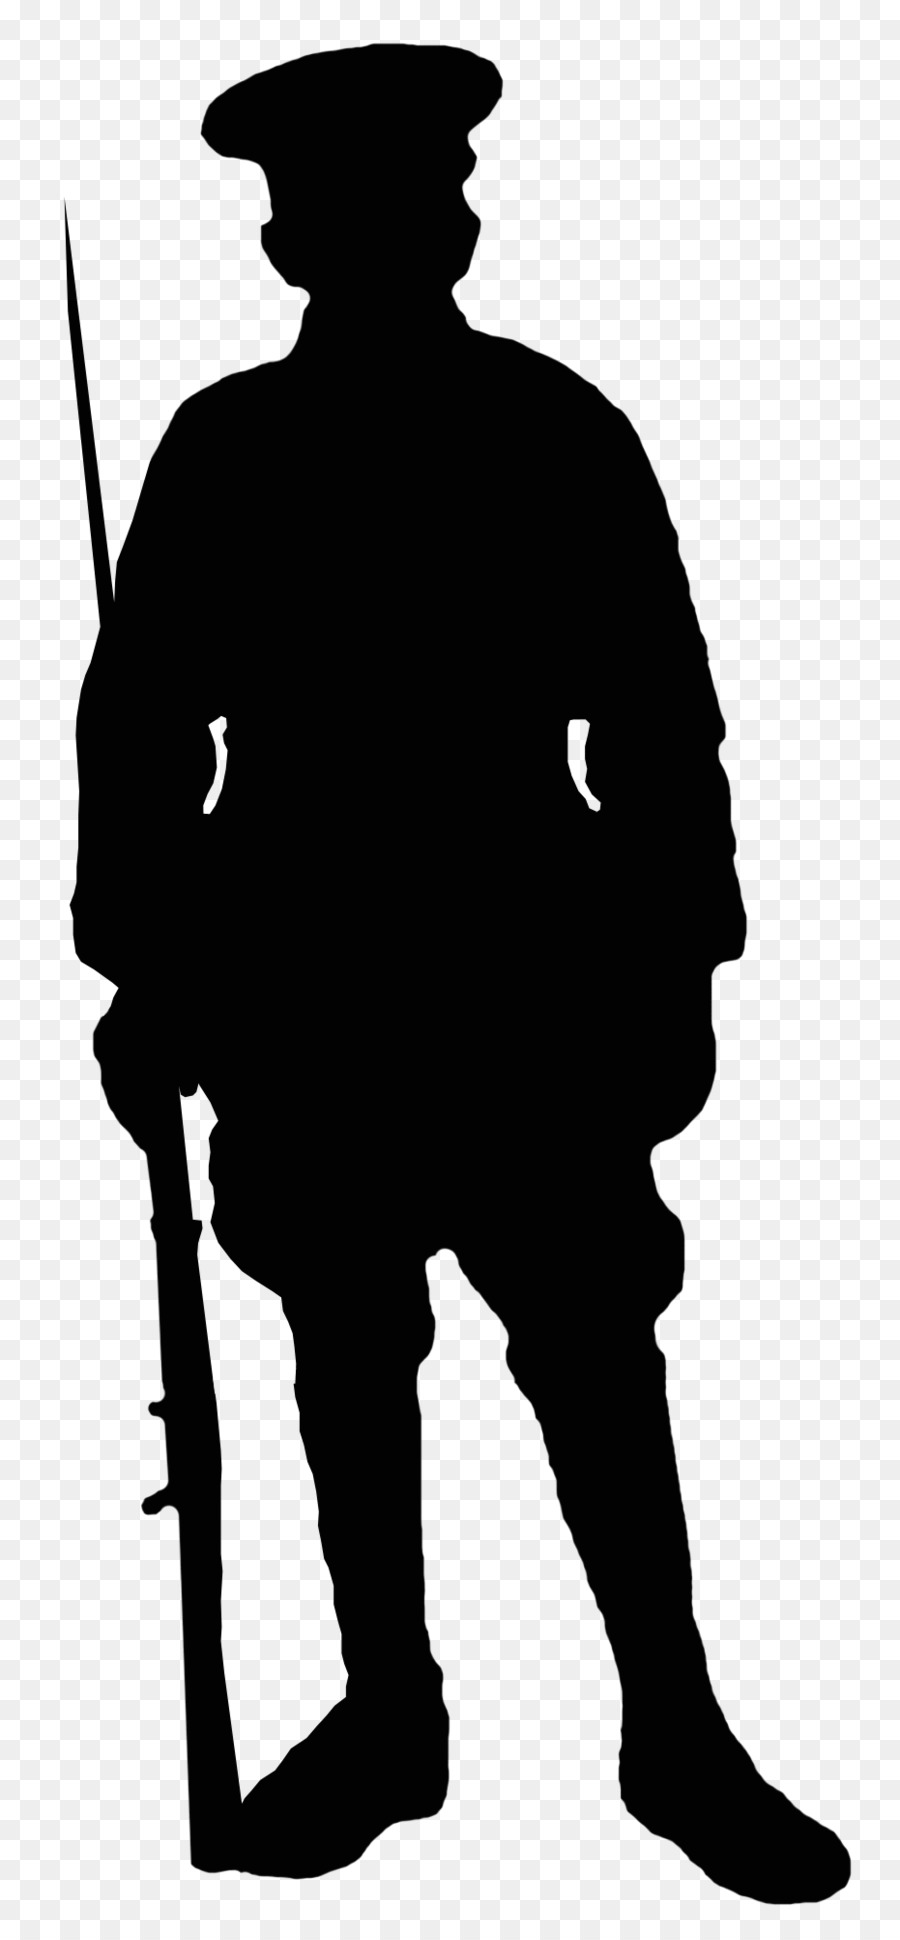 Ww1 Soldier Silhouette Template Printable